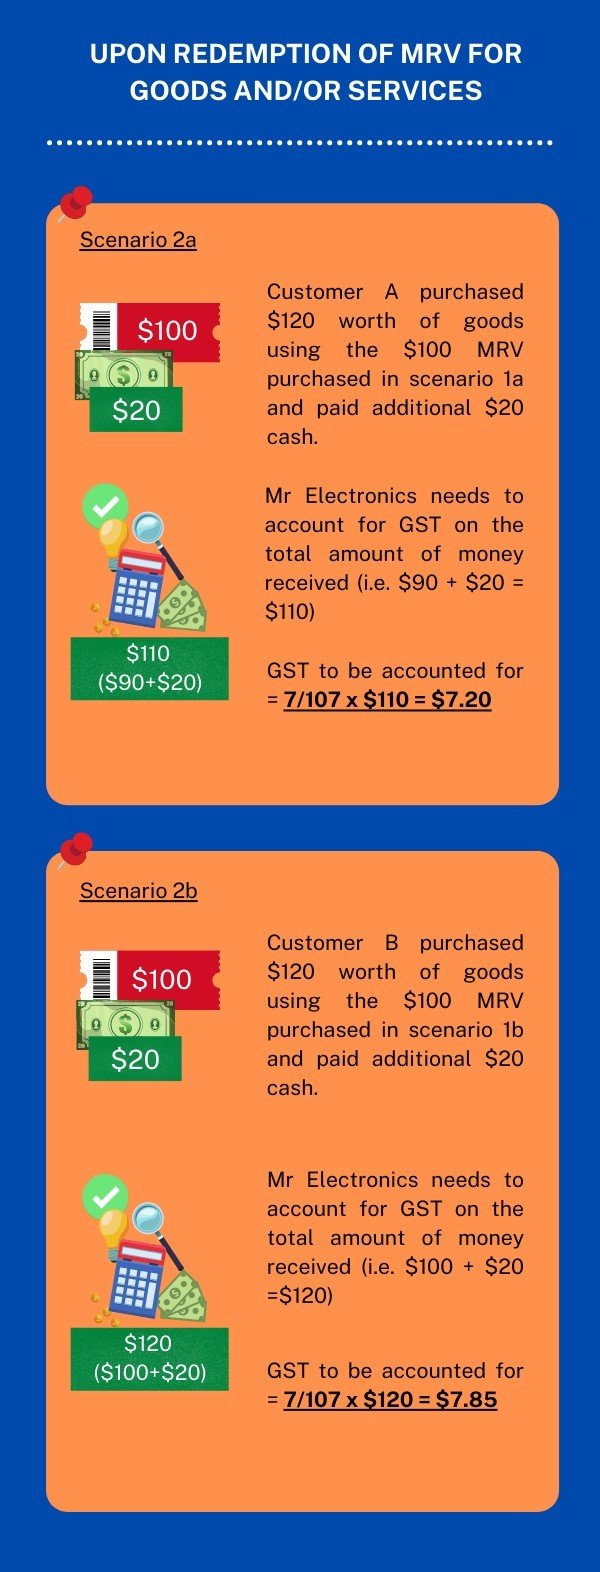 This infographic describes GST treatment of MRVs if Mr Electronics is able to track the redemption of MRV back to sales price upon redemption of MRV for goods and/or services